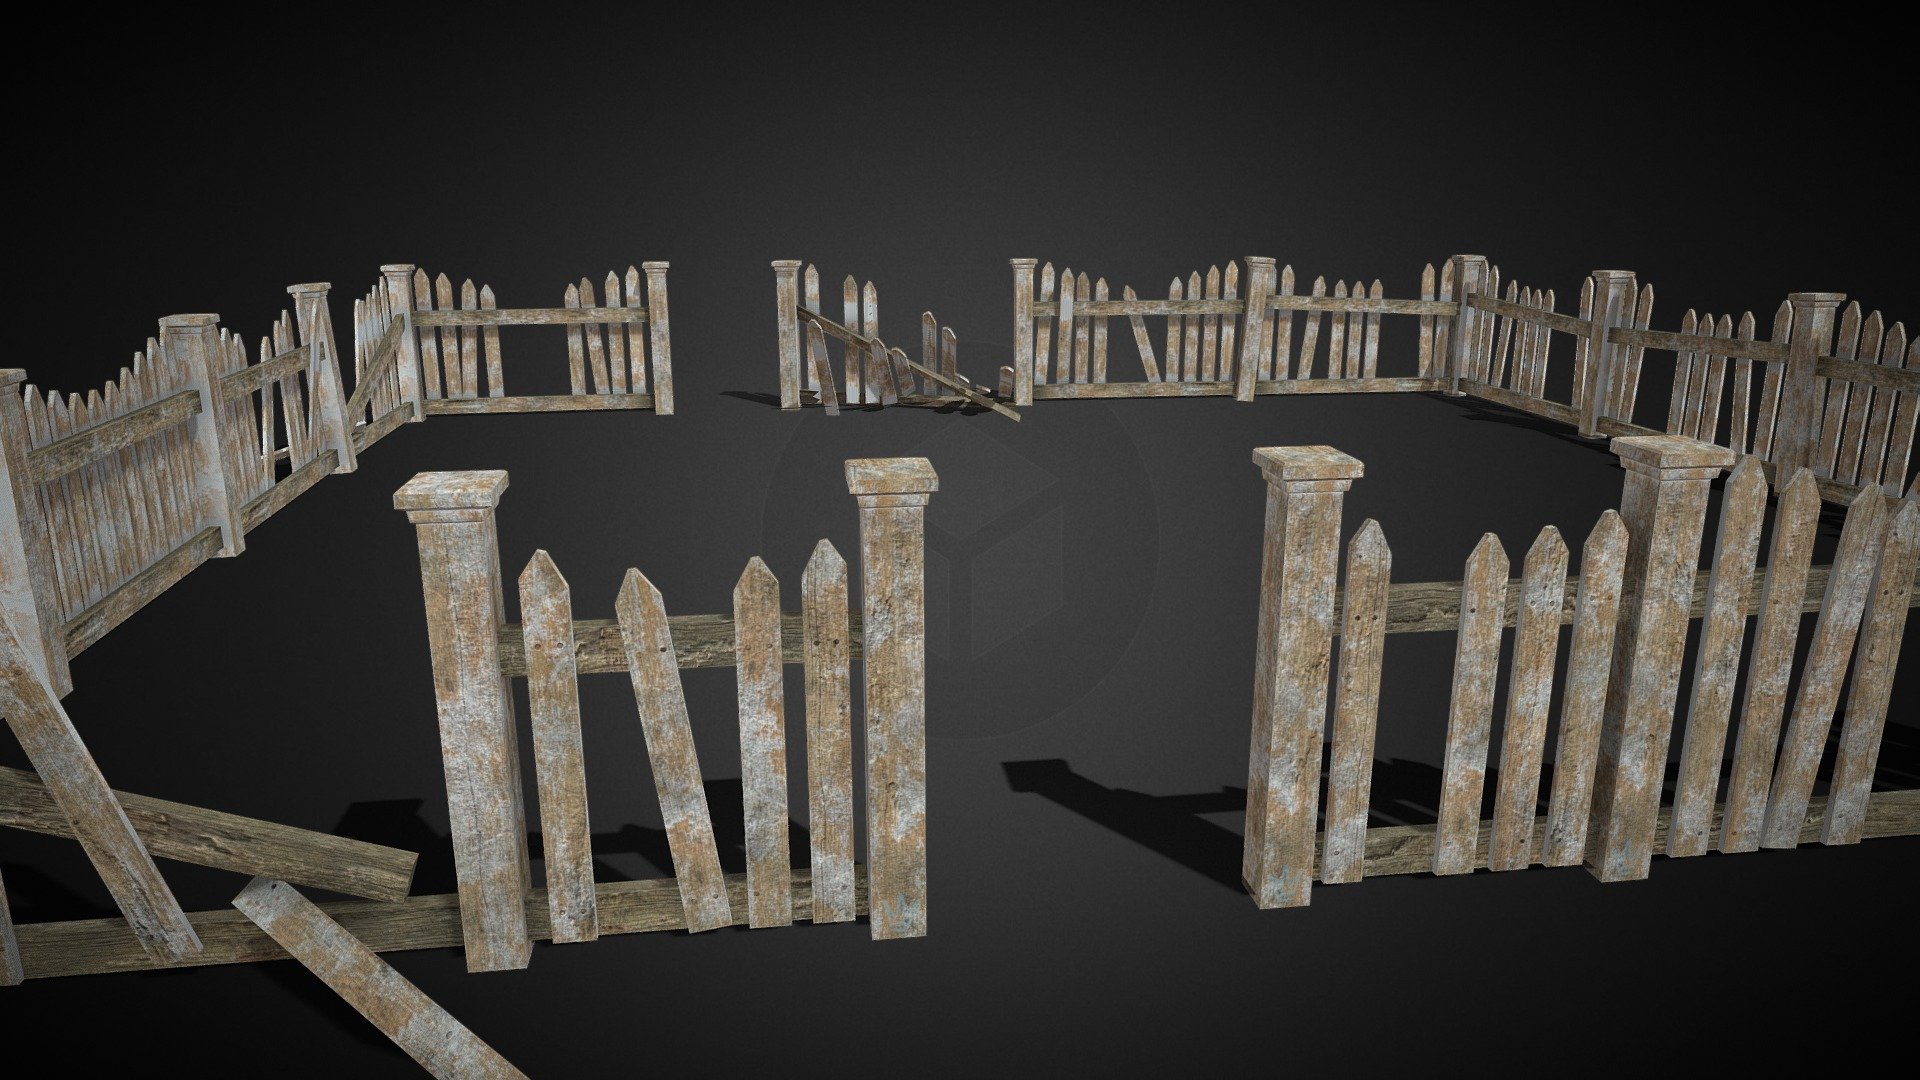 Game optimized fence to surround a post apocalyptic home, a haunted mansion or an unsettling graveyard. The fence consists of 9 components that can be assembled in any way. Optimized for UE5 and Unity.

Includes 2k base color, roughness, metallic, ambient occlusion and normal maps 3d model